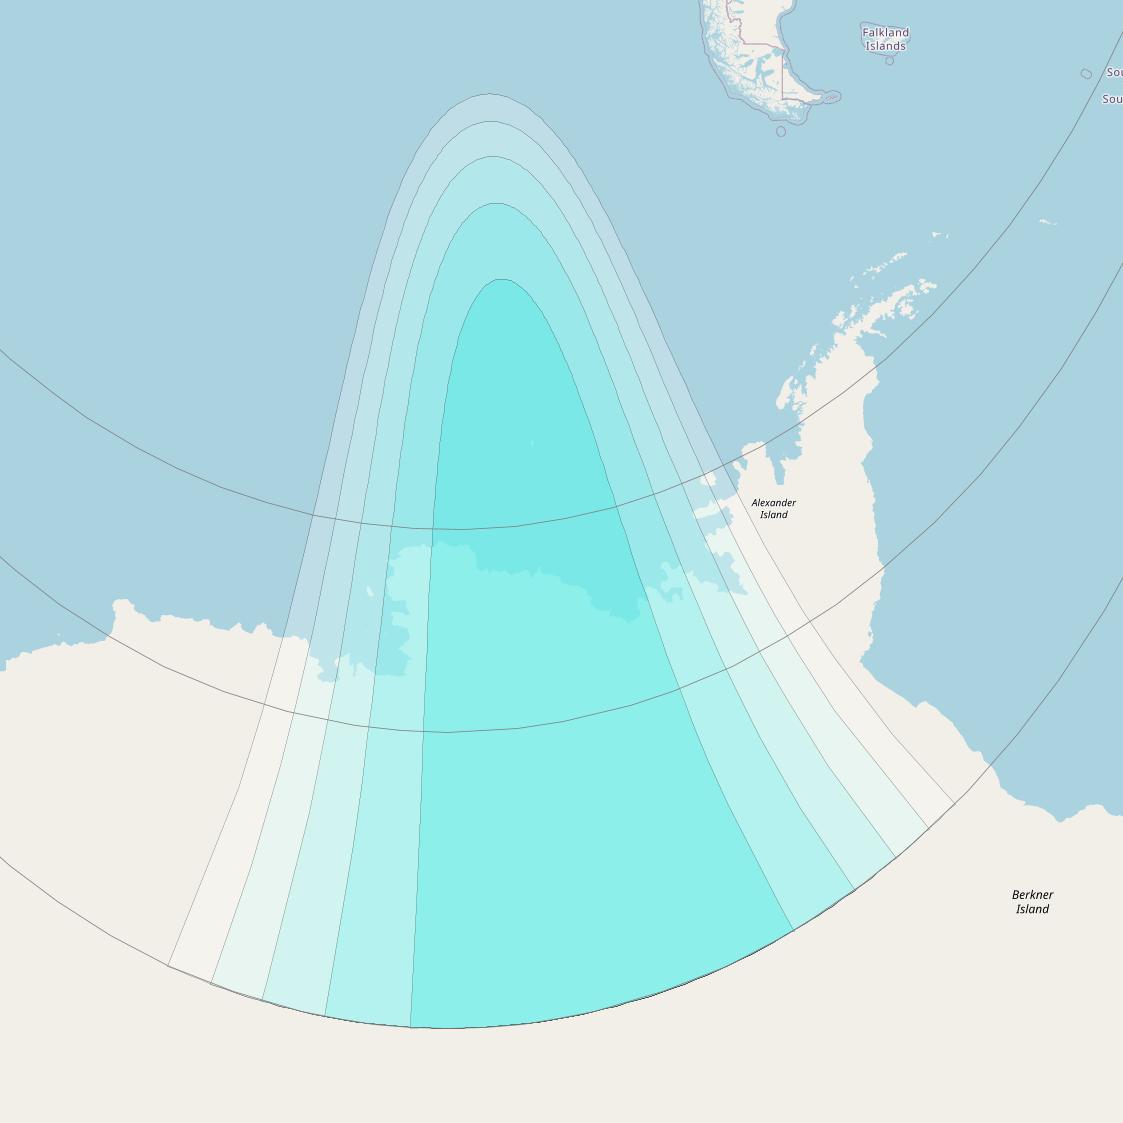 Inmarsat-4F3 at 98° W downlink L-band S097 User Spot beam coverage map